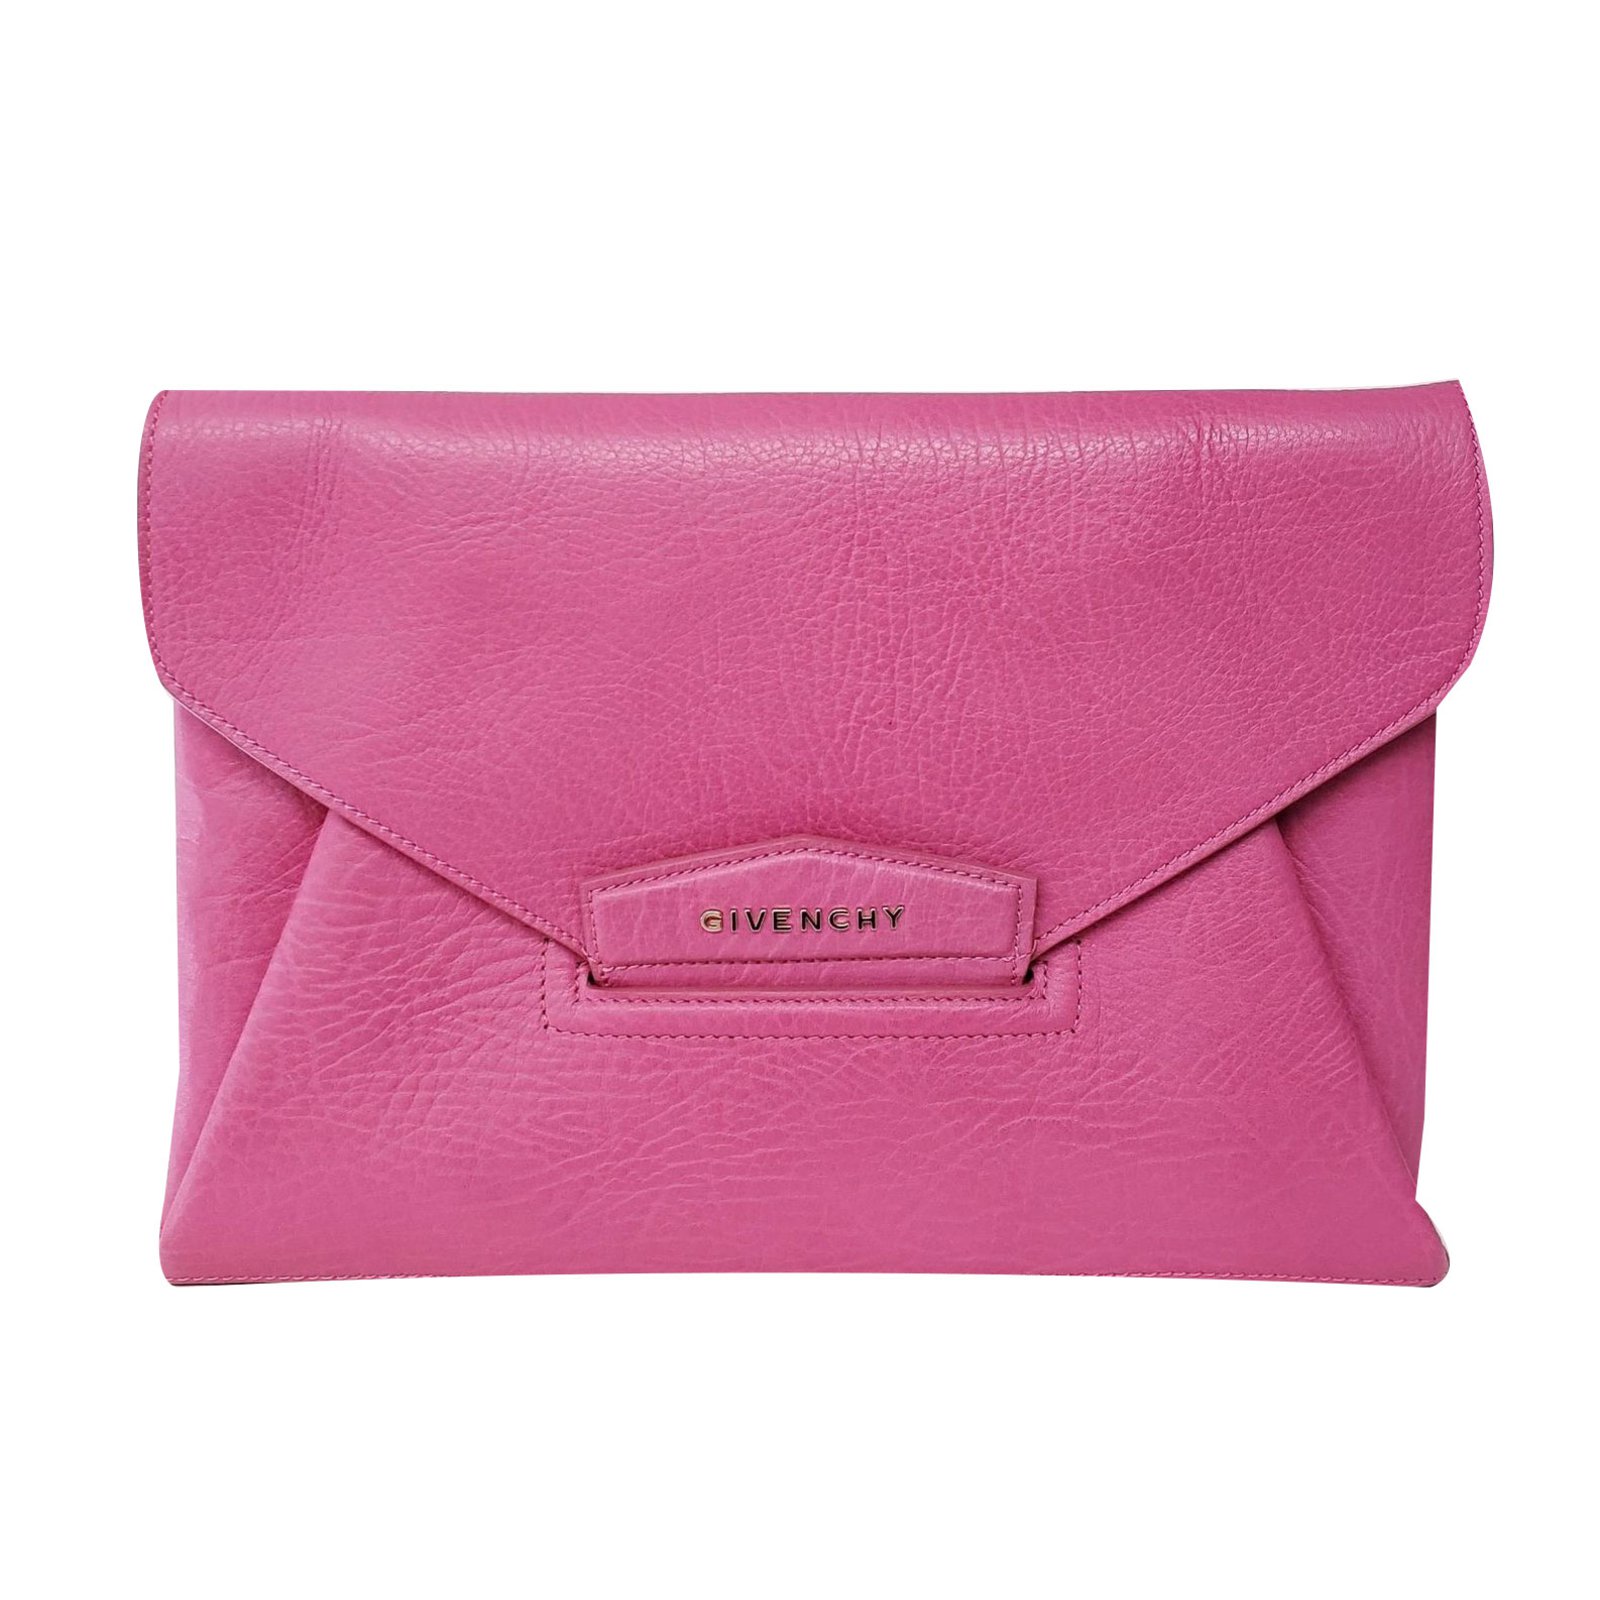 givenchy leather clutch